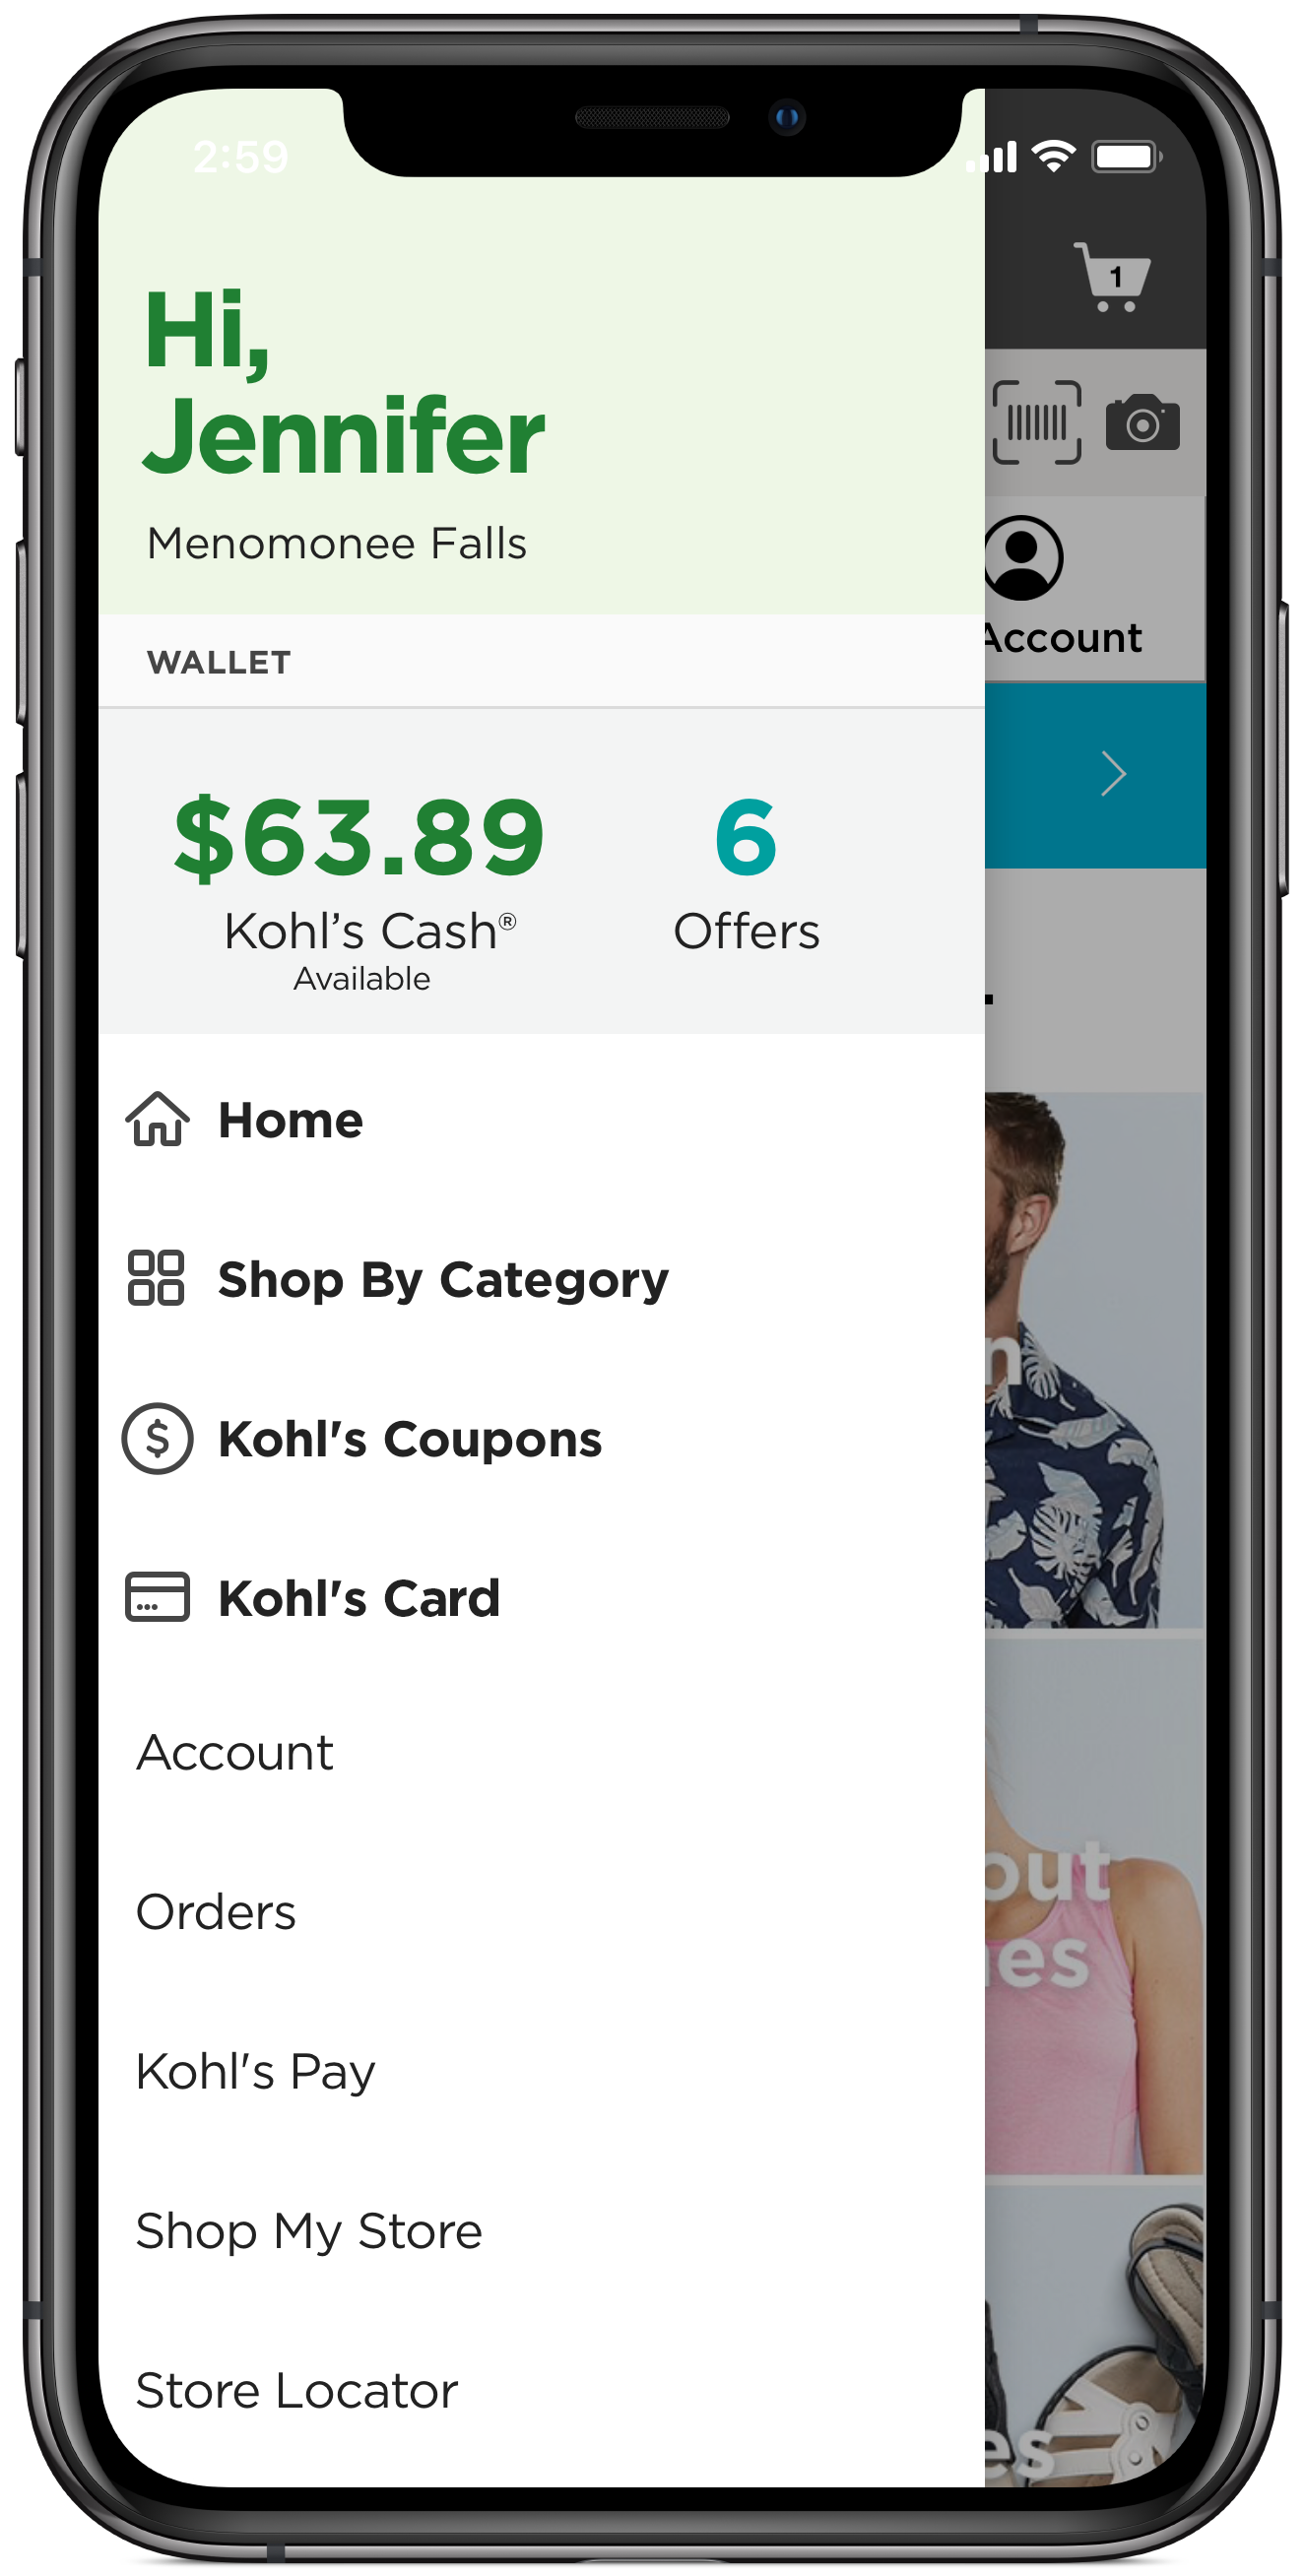 36 Top Photos Download The Kohls App Today : Download The Kohl S App All Your Offers And Kohl S Cash Are Waiting Get 50 Yes 2 You Points When You Sign In Download On The App Stor App Kohls Download App